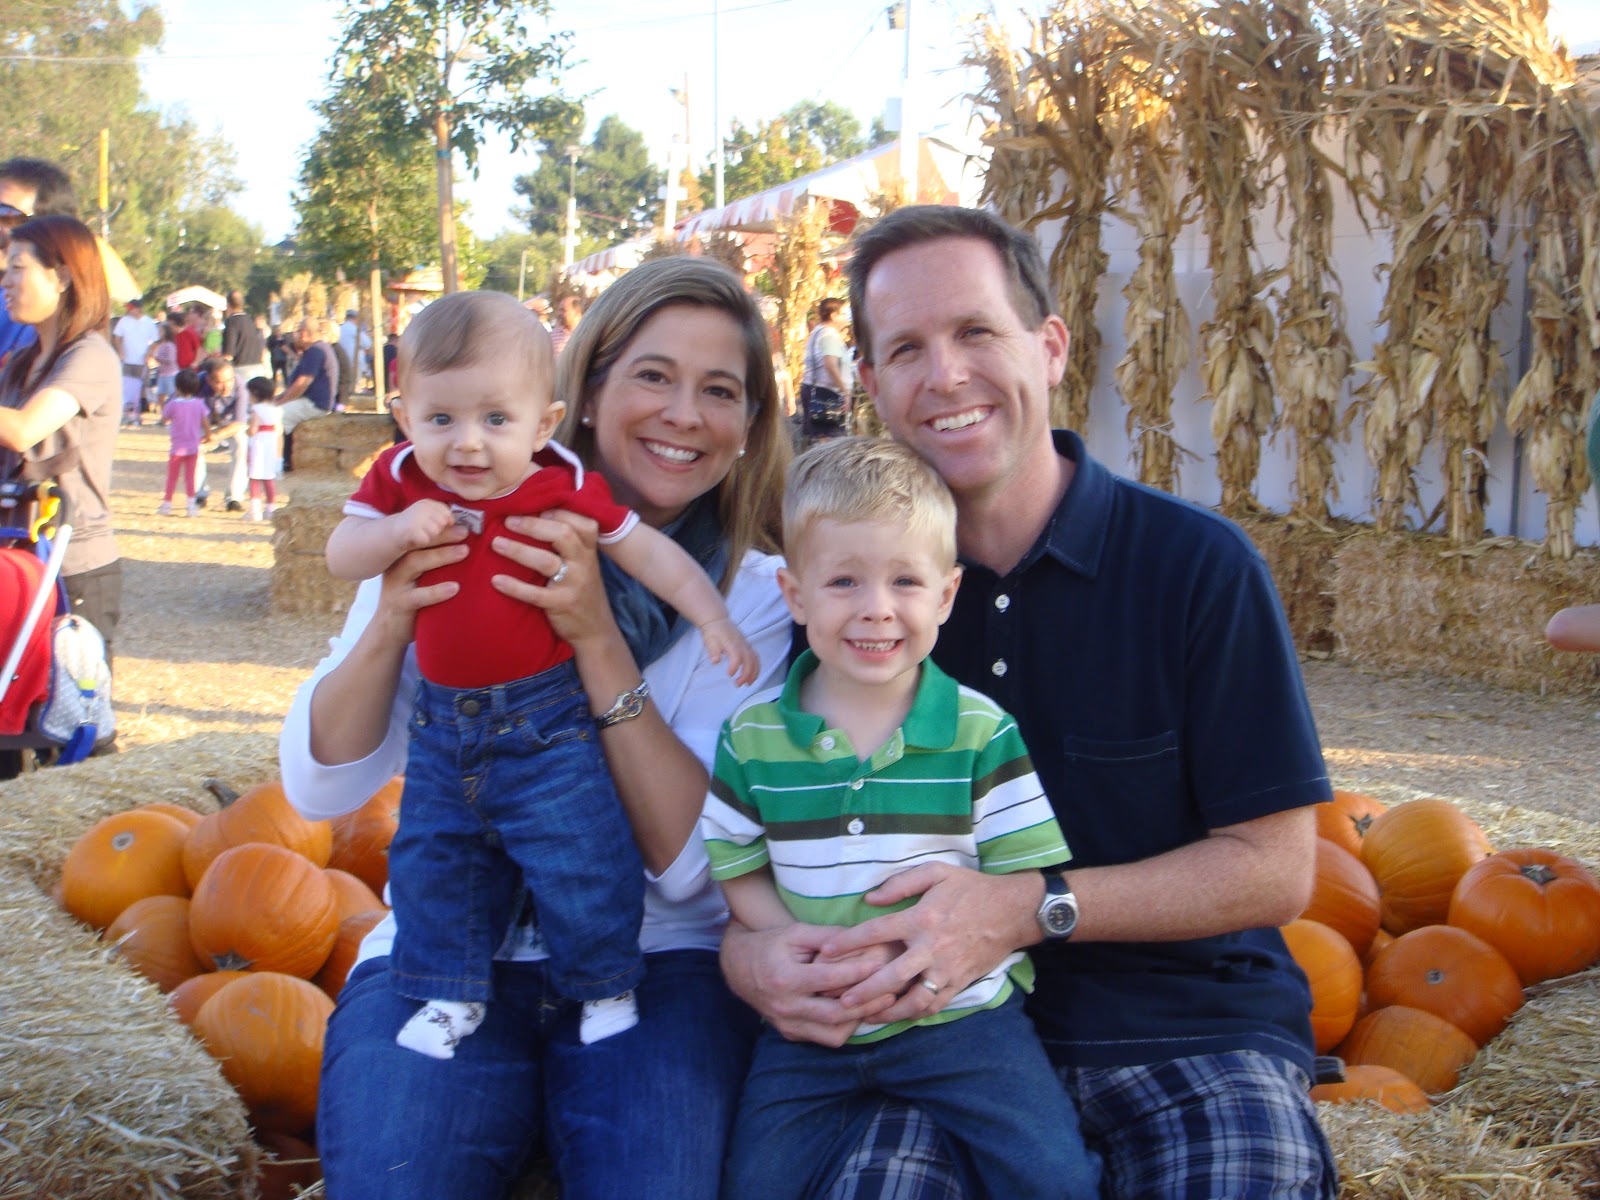 Family Pictures Ideas For Fall